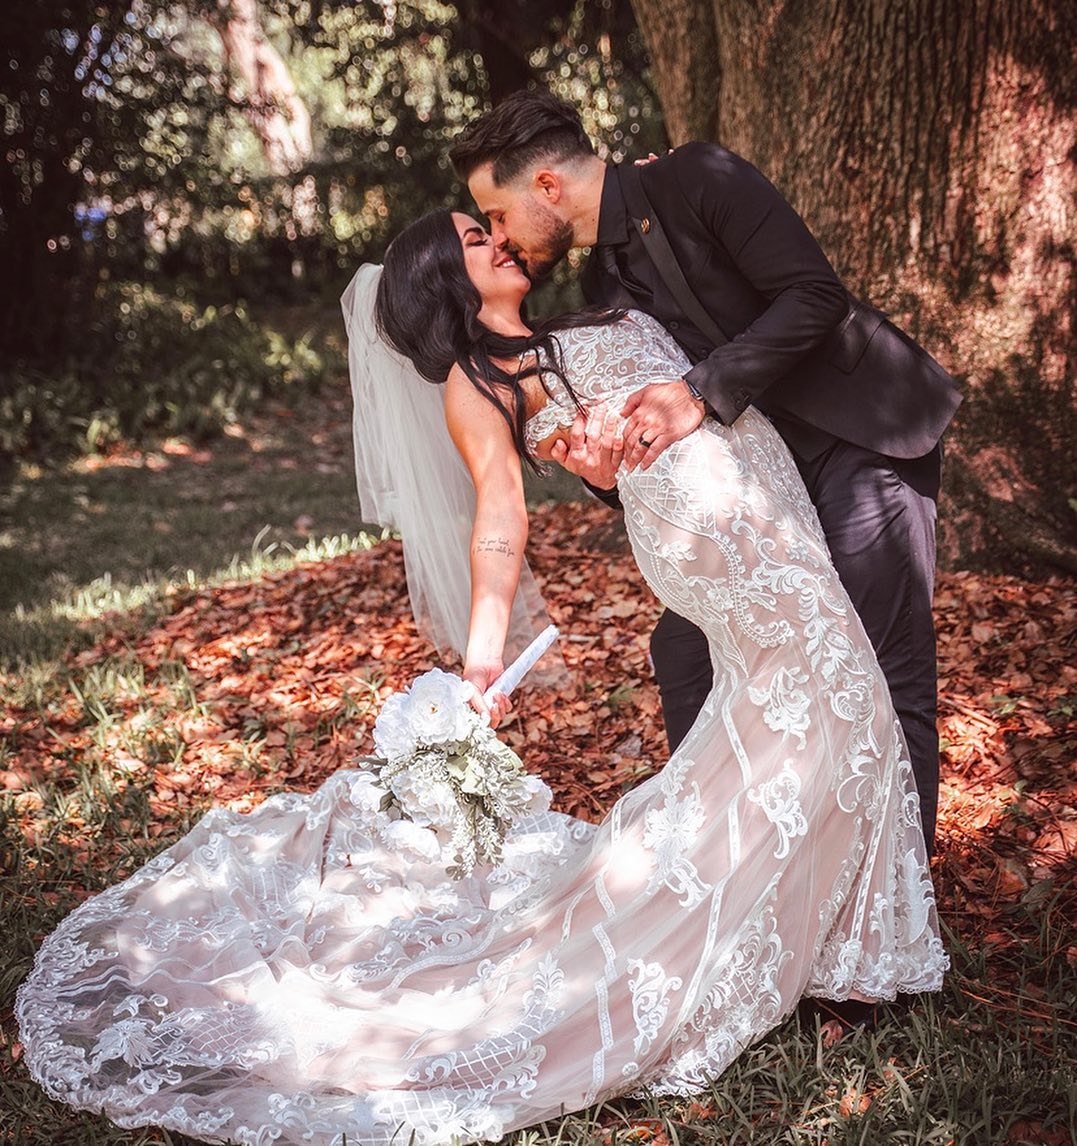 🤍 Happy Anniversary to the love of my life @donfarinacosplay Time really flies when you’re spending it with your soulmate. 

In you I’ve found the greatest love I’ve ever known. My truest and best friend. I look forward to each day because of you. My dyad in the force. Here’s to forever baby! ✨05-04-21✨